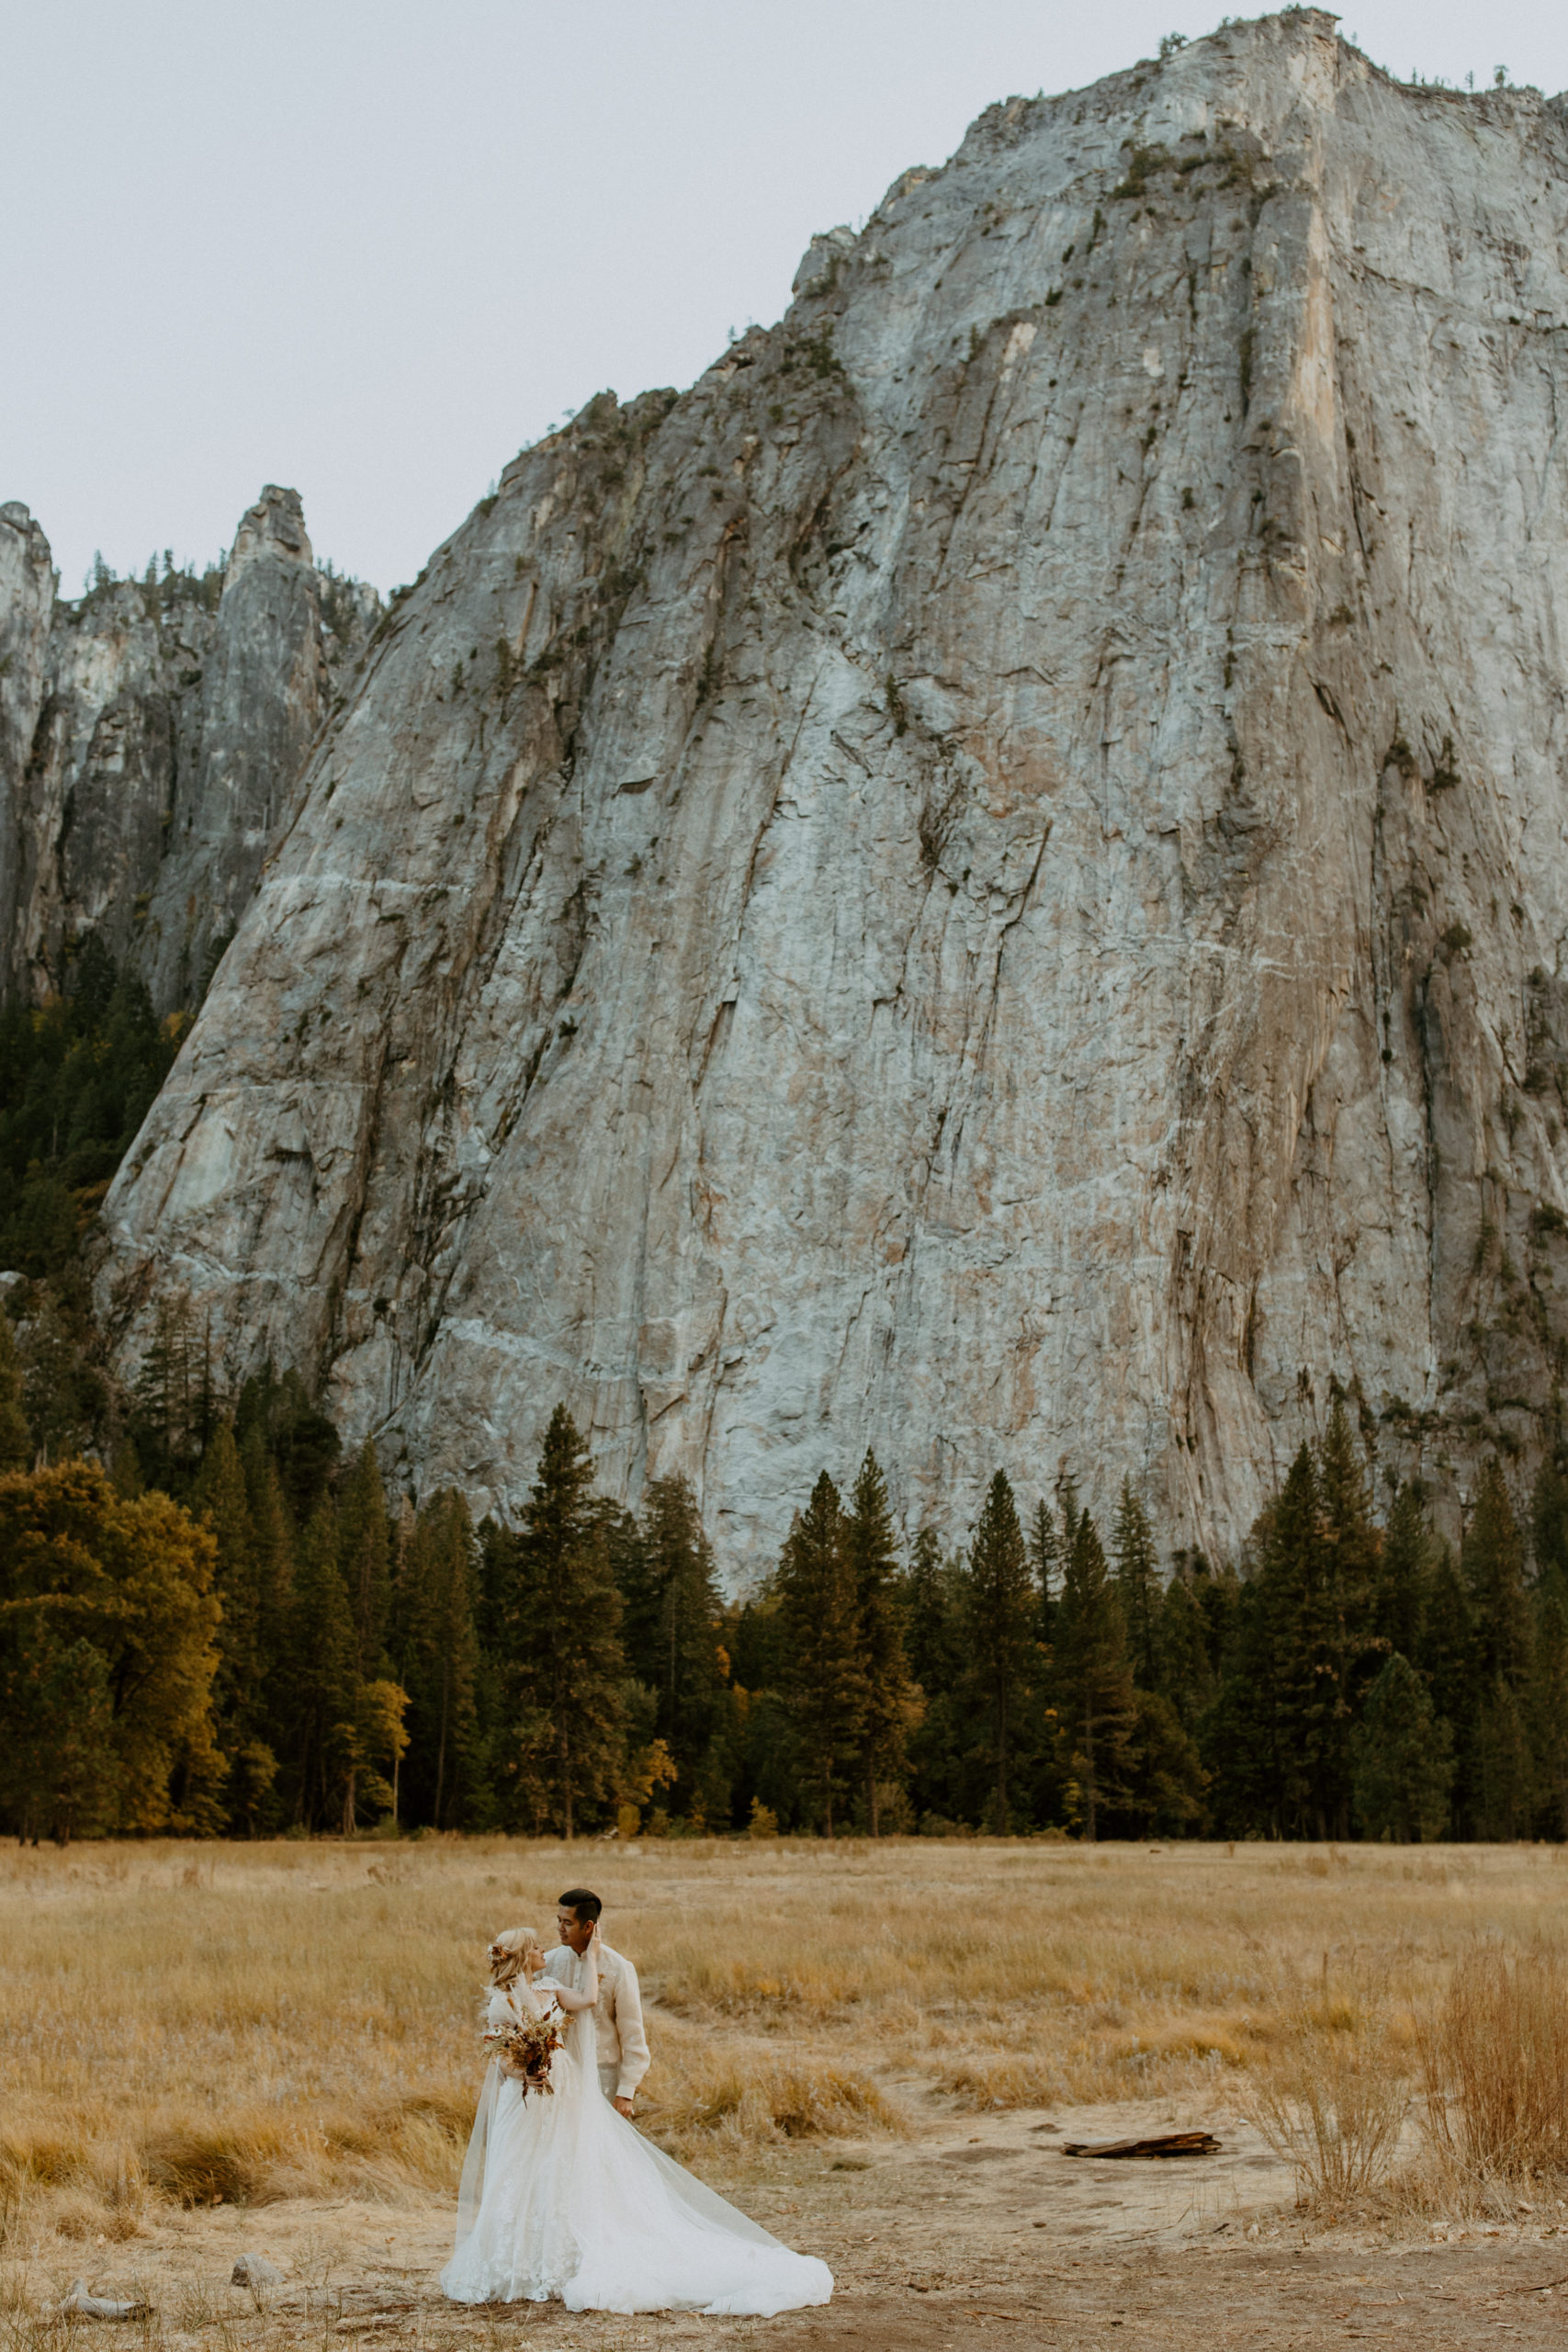 the couple at the bottom of the Yosemite Valley